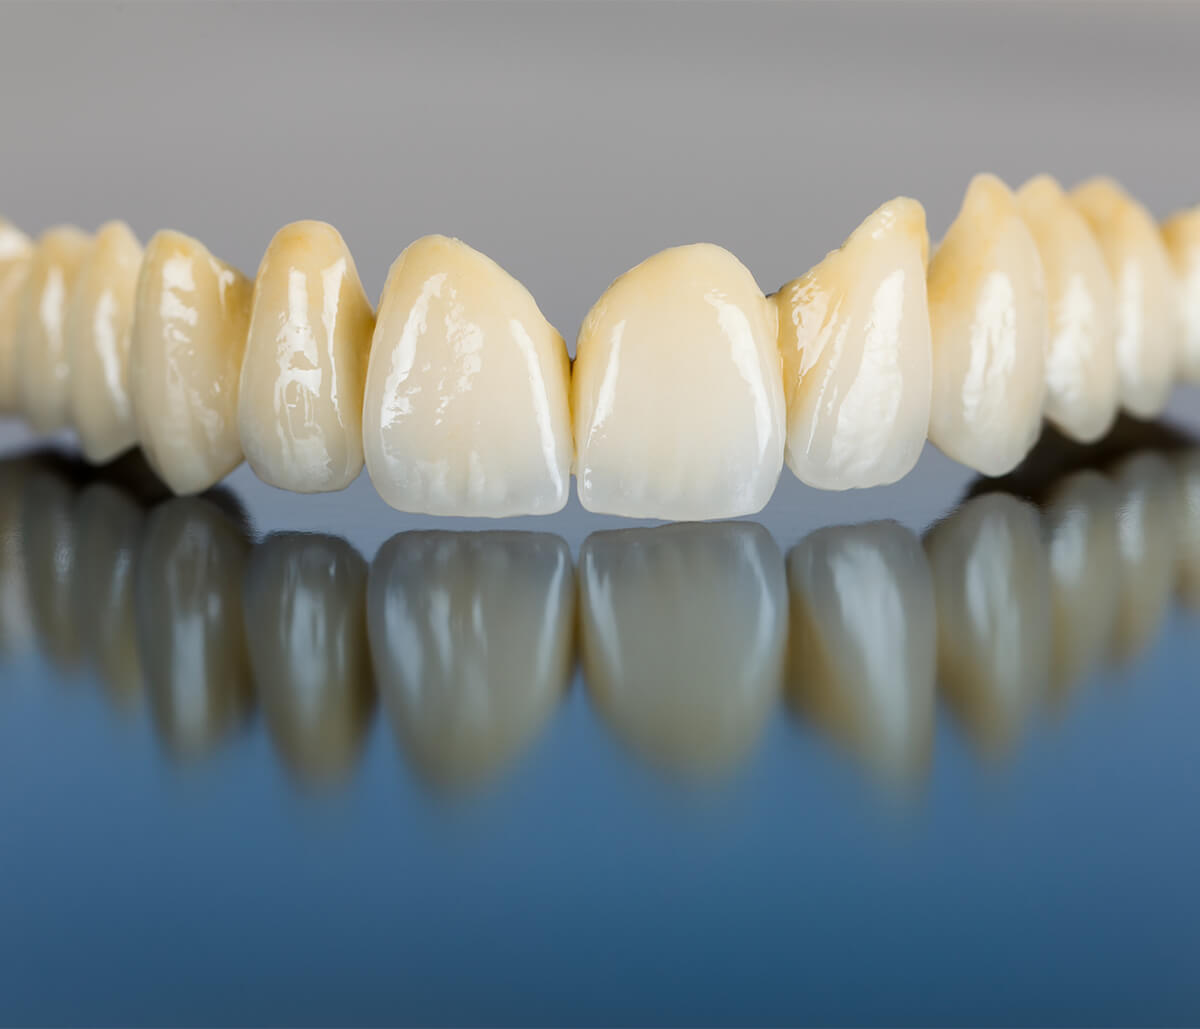 Implant Supported Dentures in Palo Alto CA Area